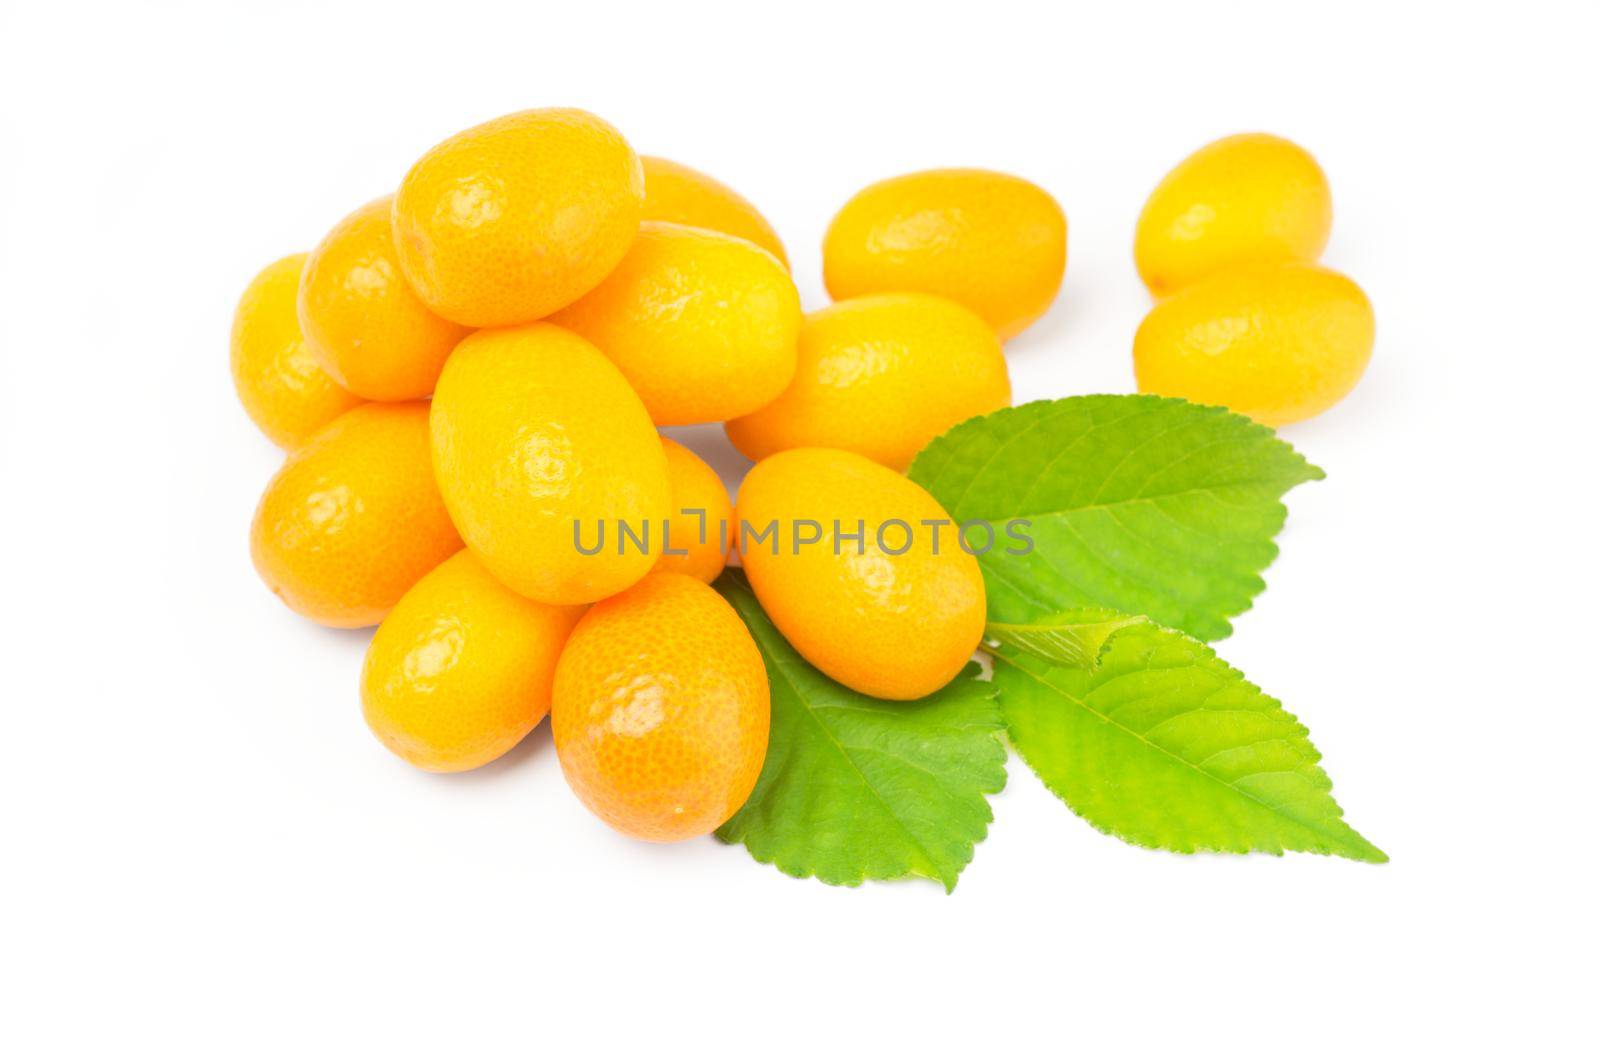 Kumquat with leaf isolated on white background cutout by Proff